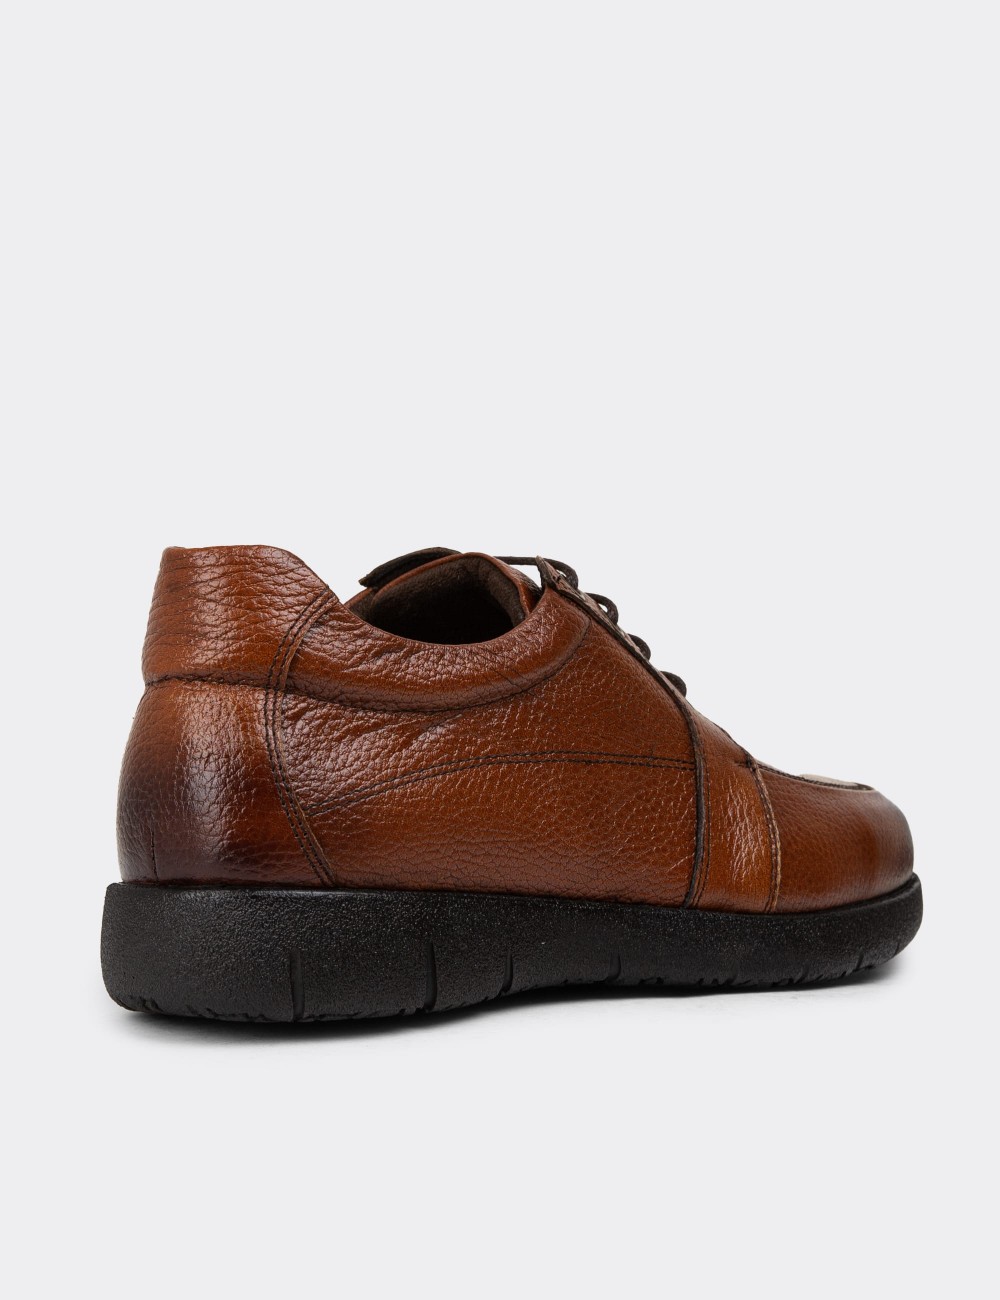 Tan Leather Lace-up Shoes - 01940MTBAC02